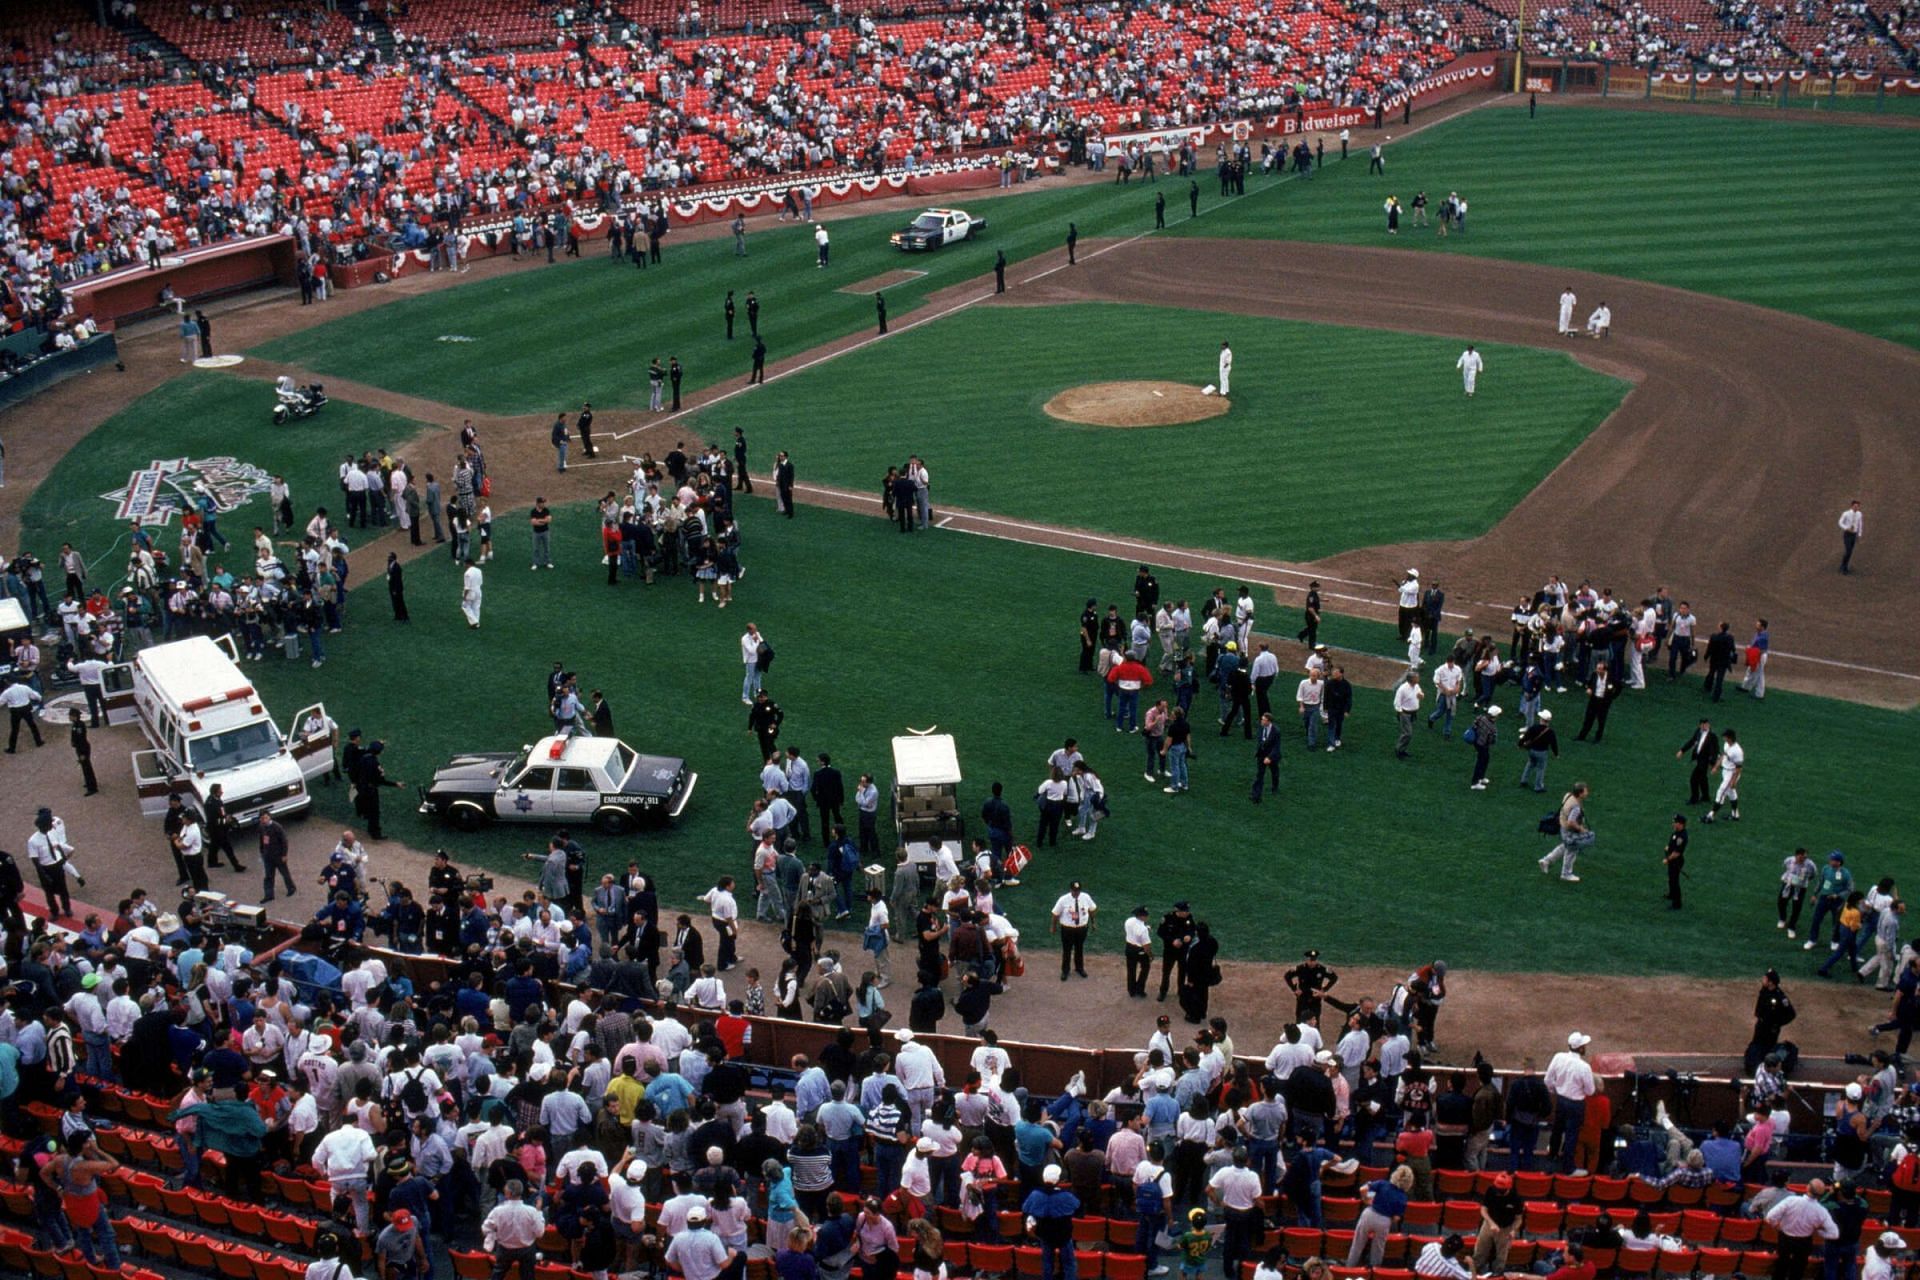 Crowd at Candlestick Park after the earthquake struck on October 17, 1989 (Photo from Otto Greule Jr/Getty Images)